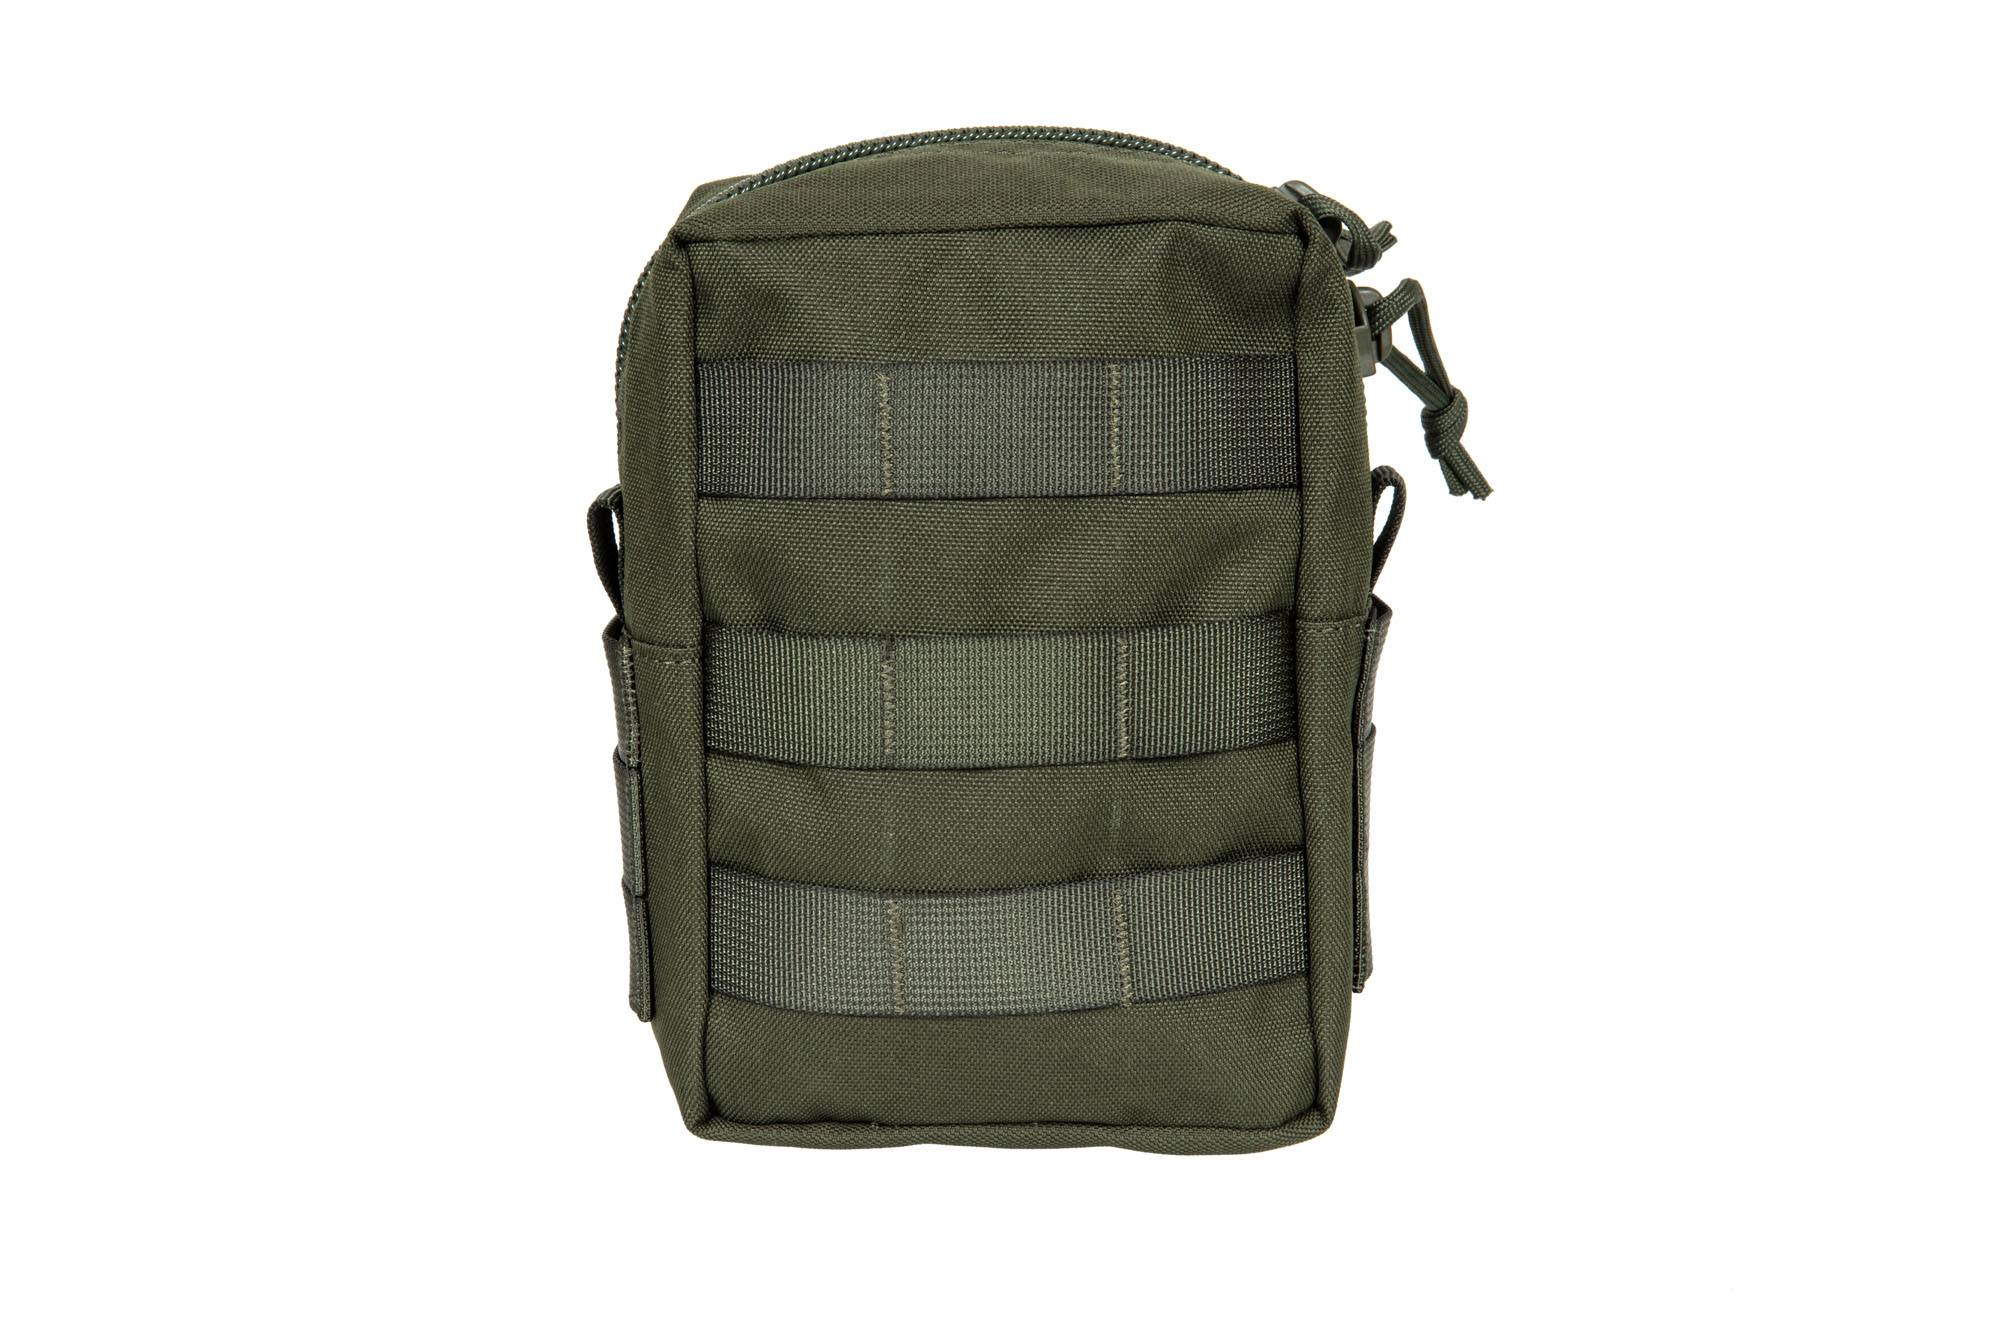 Medium MOLLE Cargo Pouch - Olive Drab